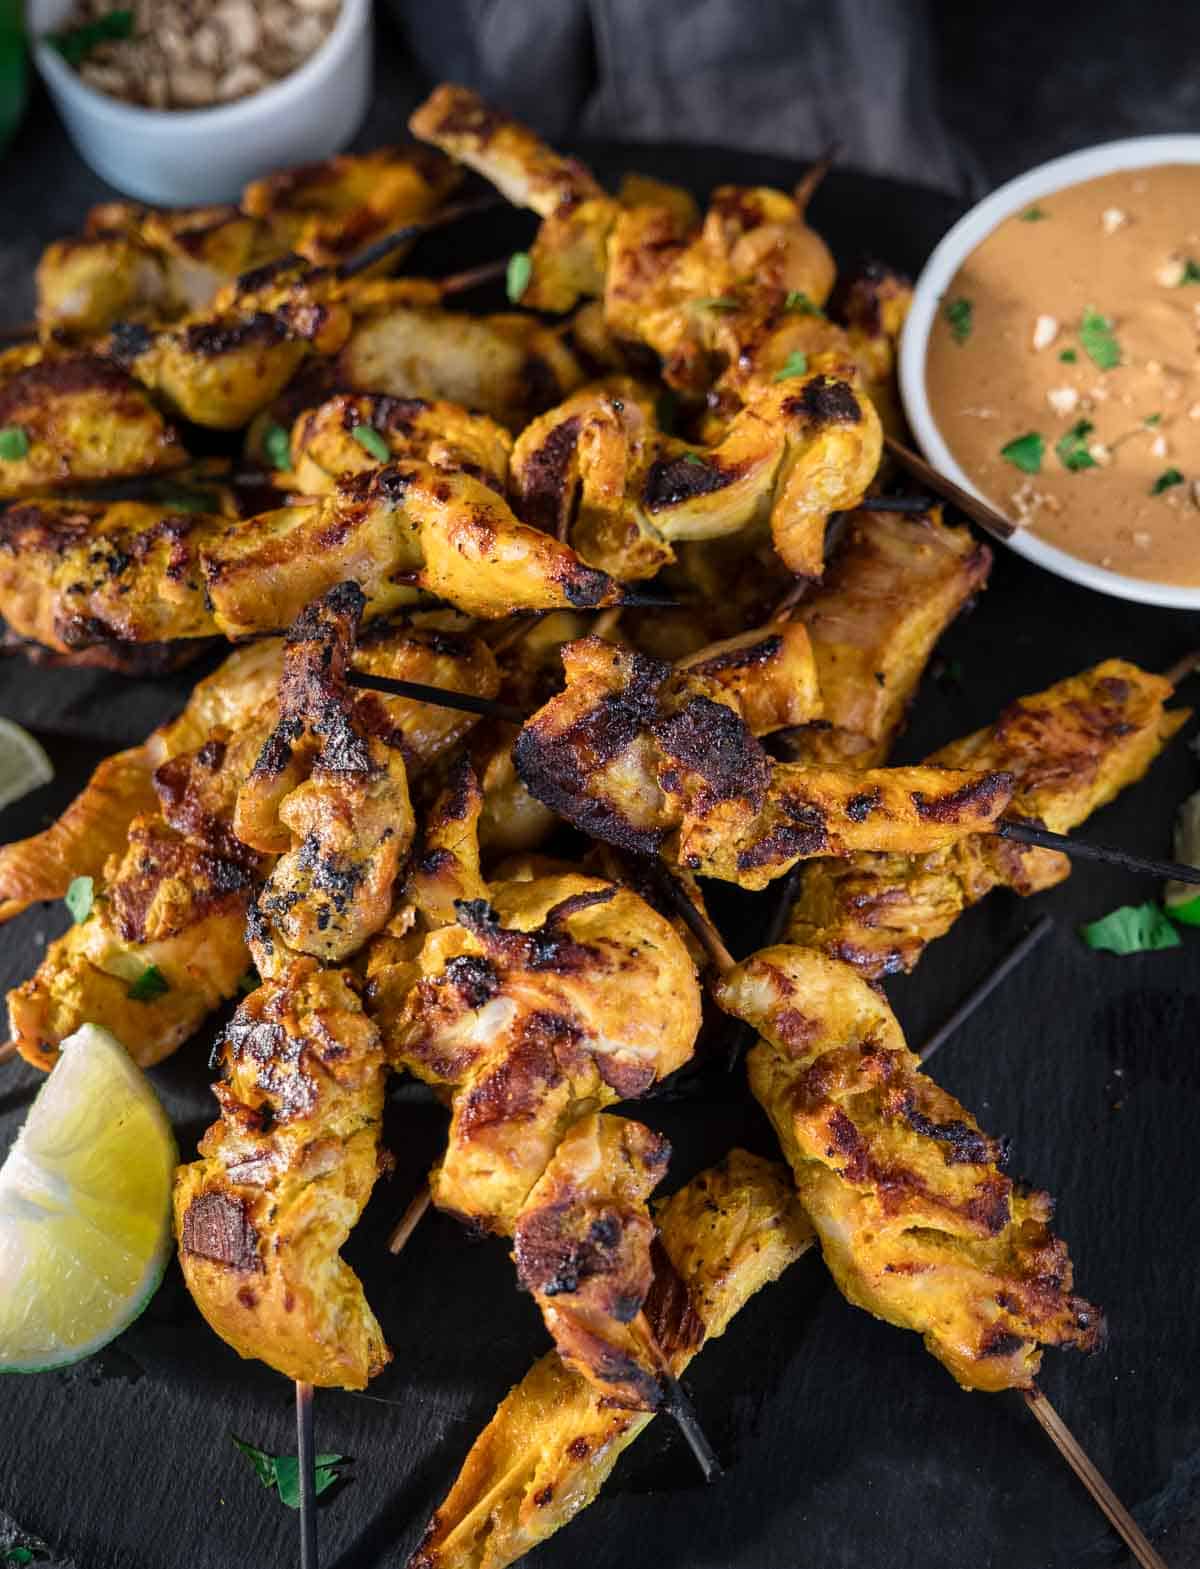 Chicken Satay on skewers with peanut sauce